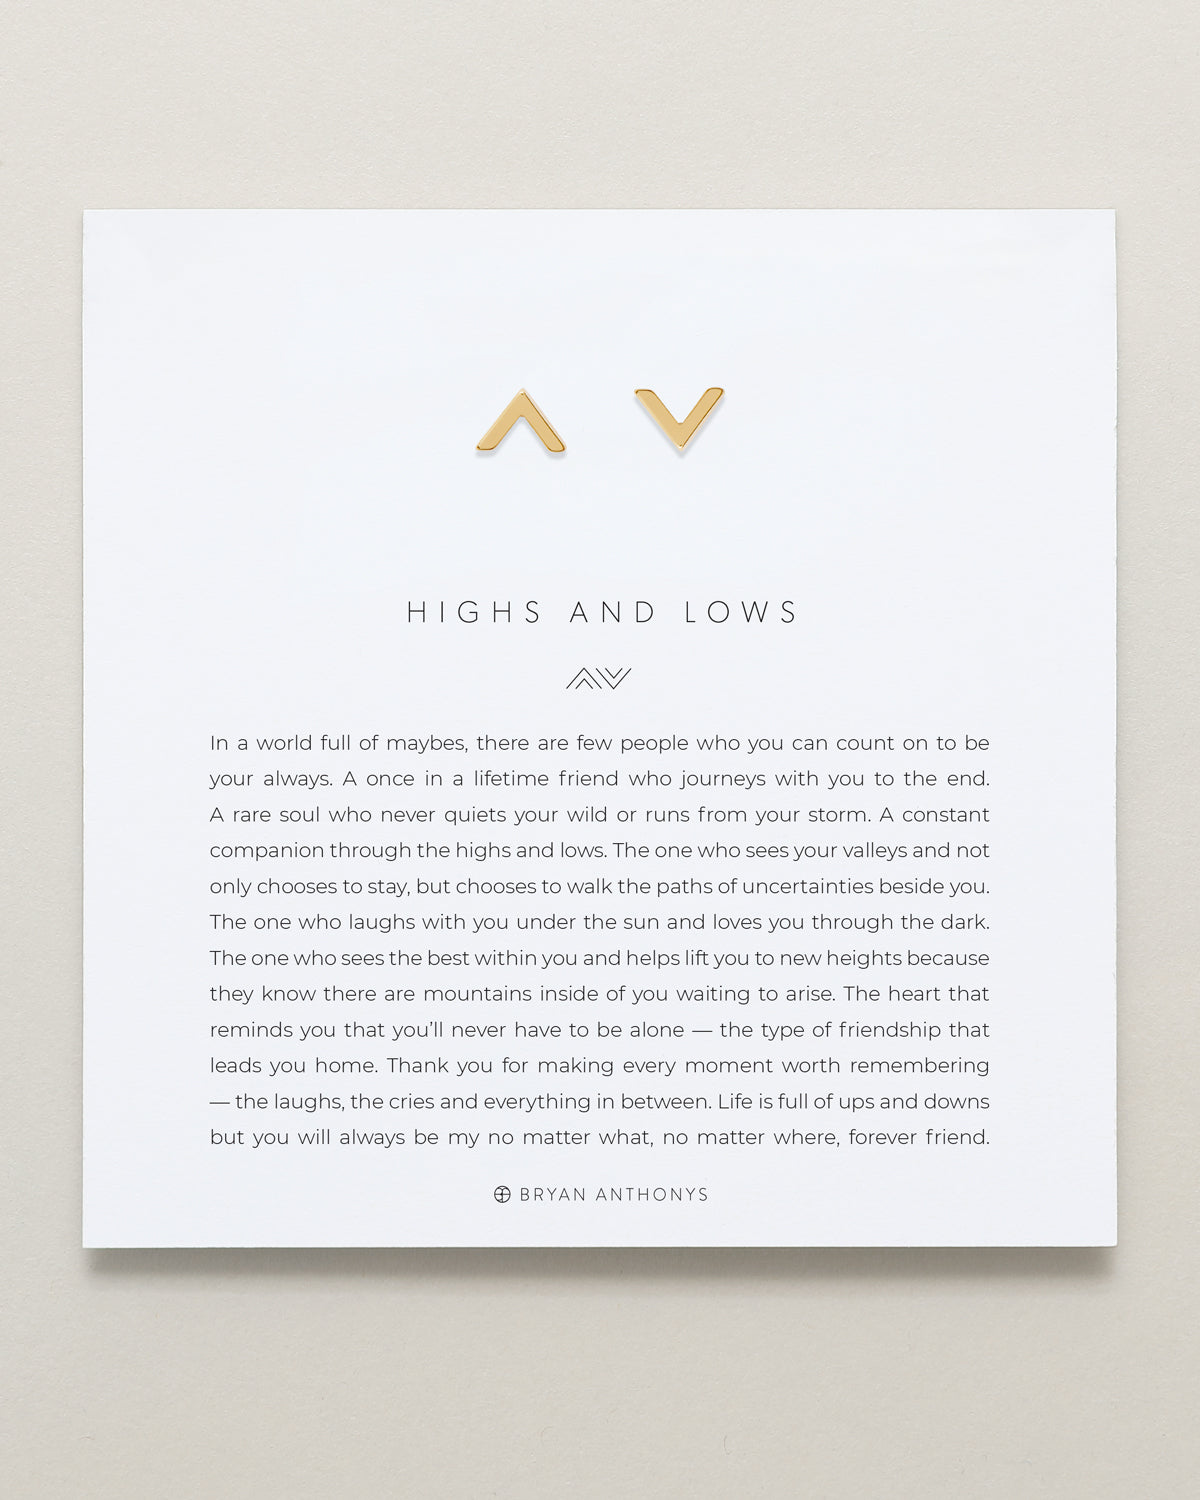 Bryan Anthonys Highs And Lows Gold Stud Earring On Card